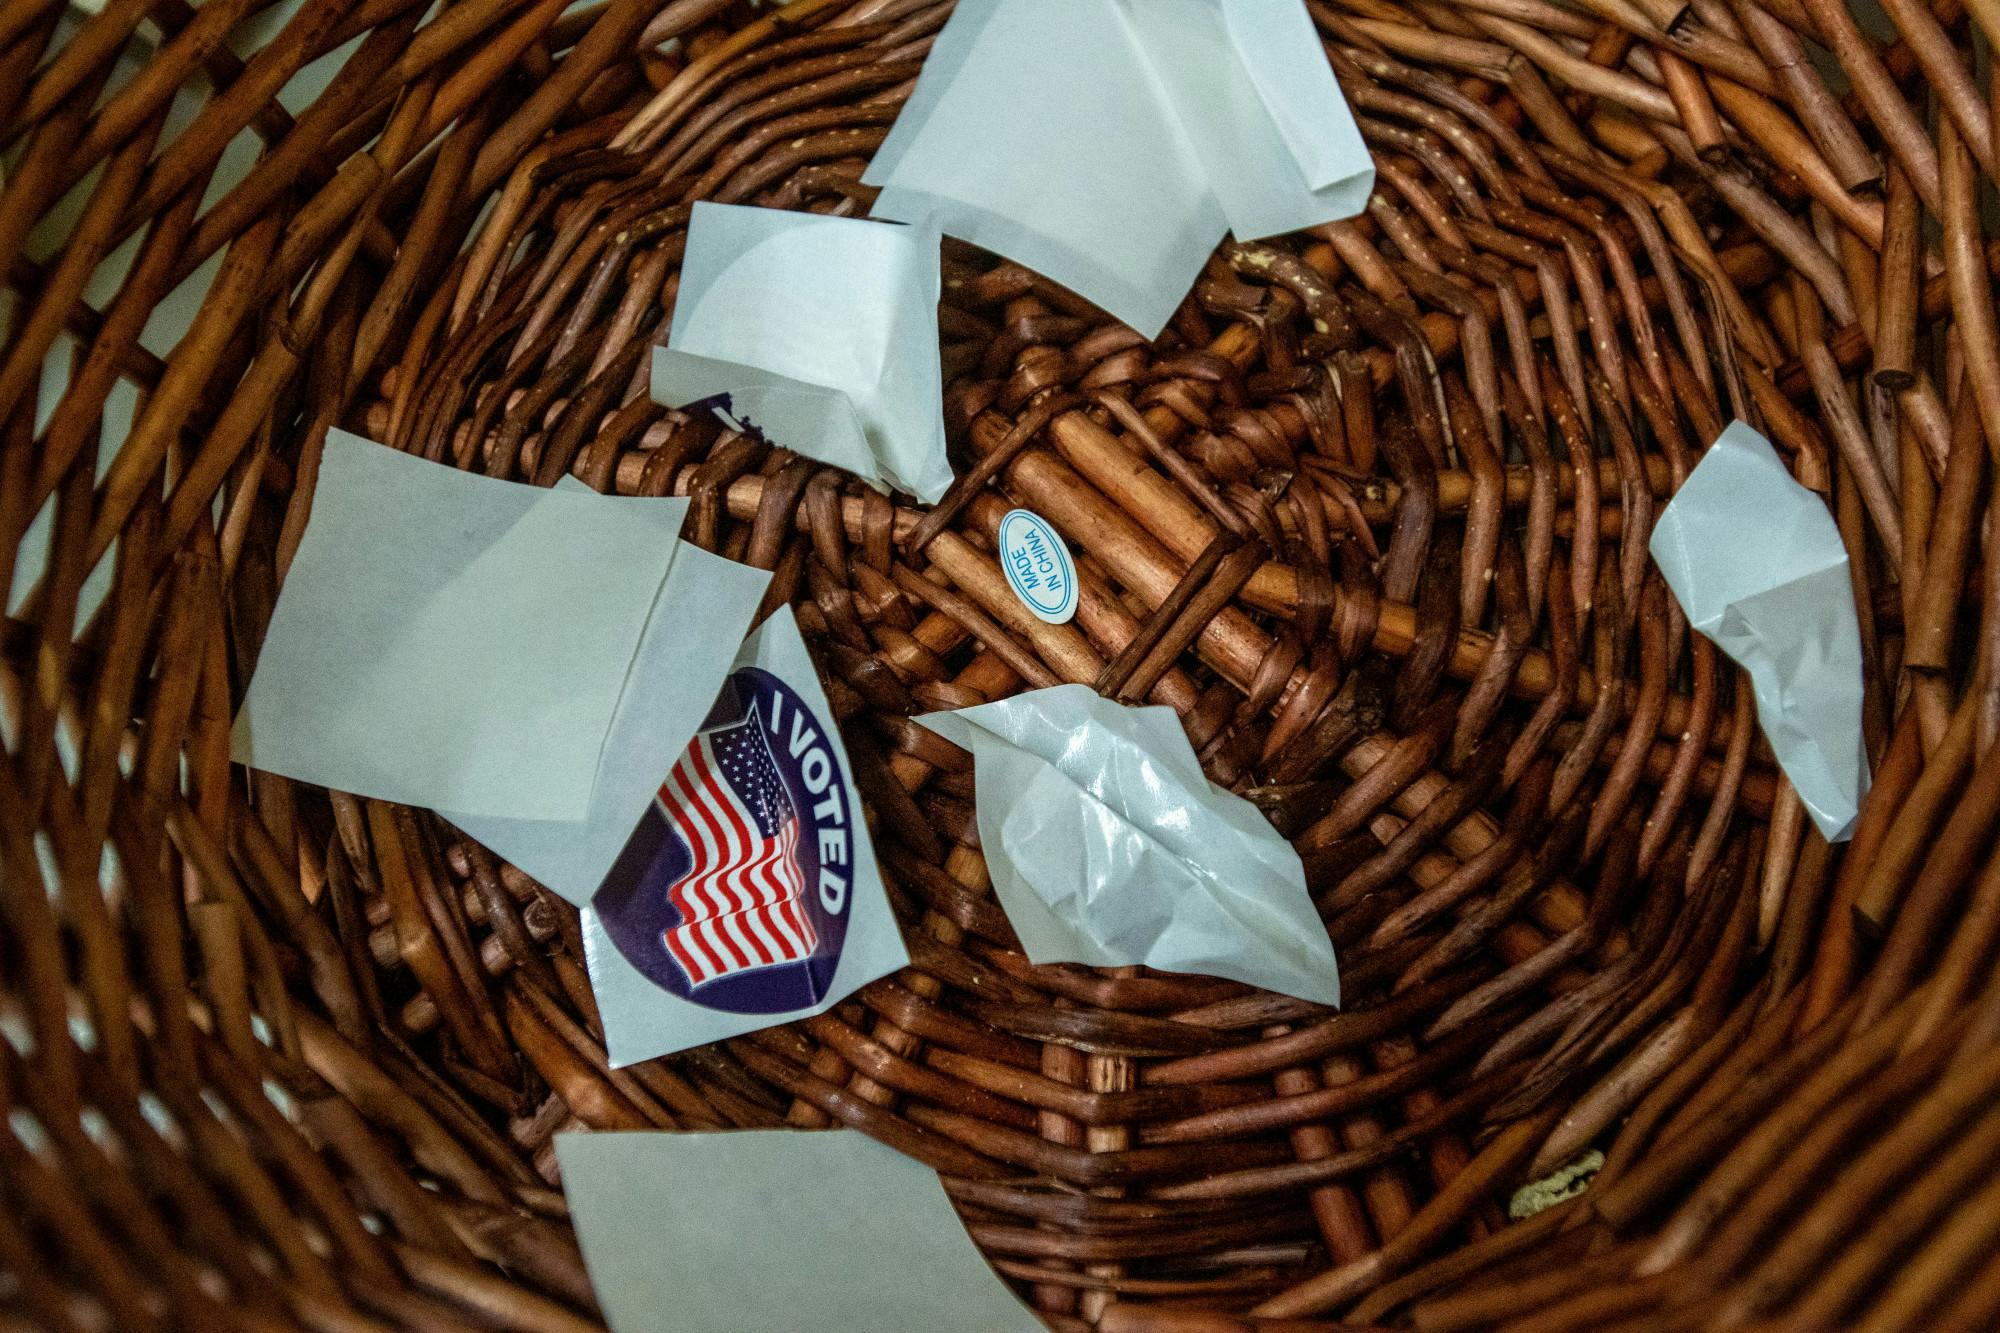 'I voted' sticker wrappers sit in the bottom of a waste basket.